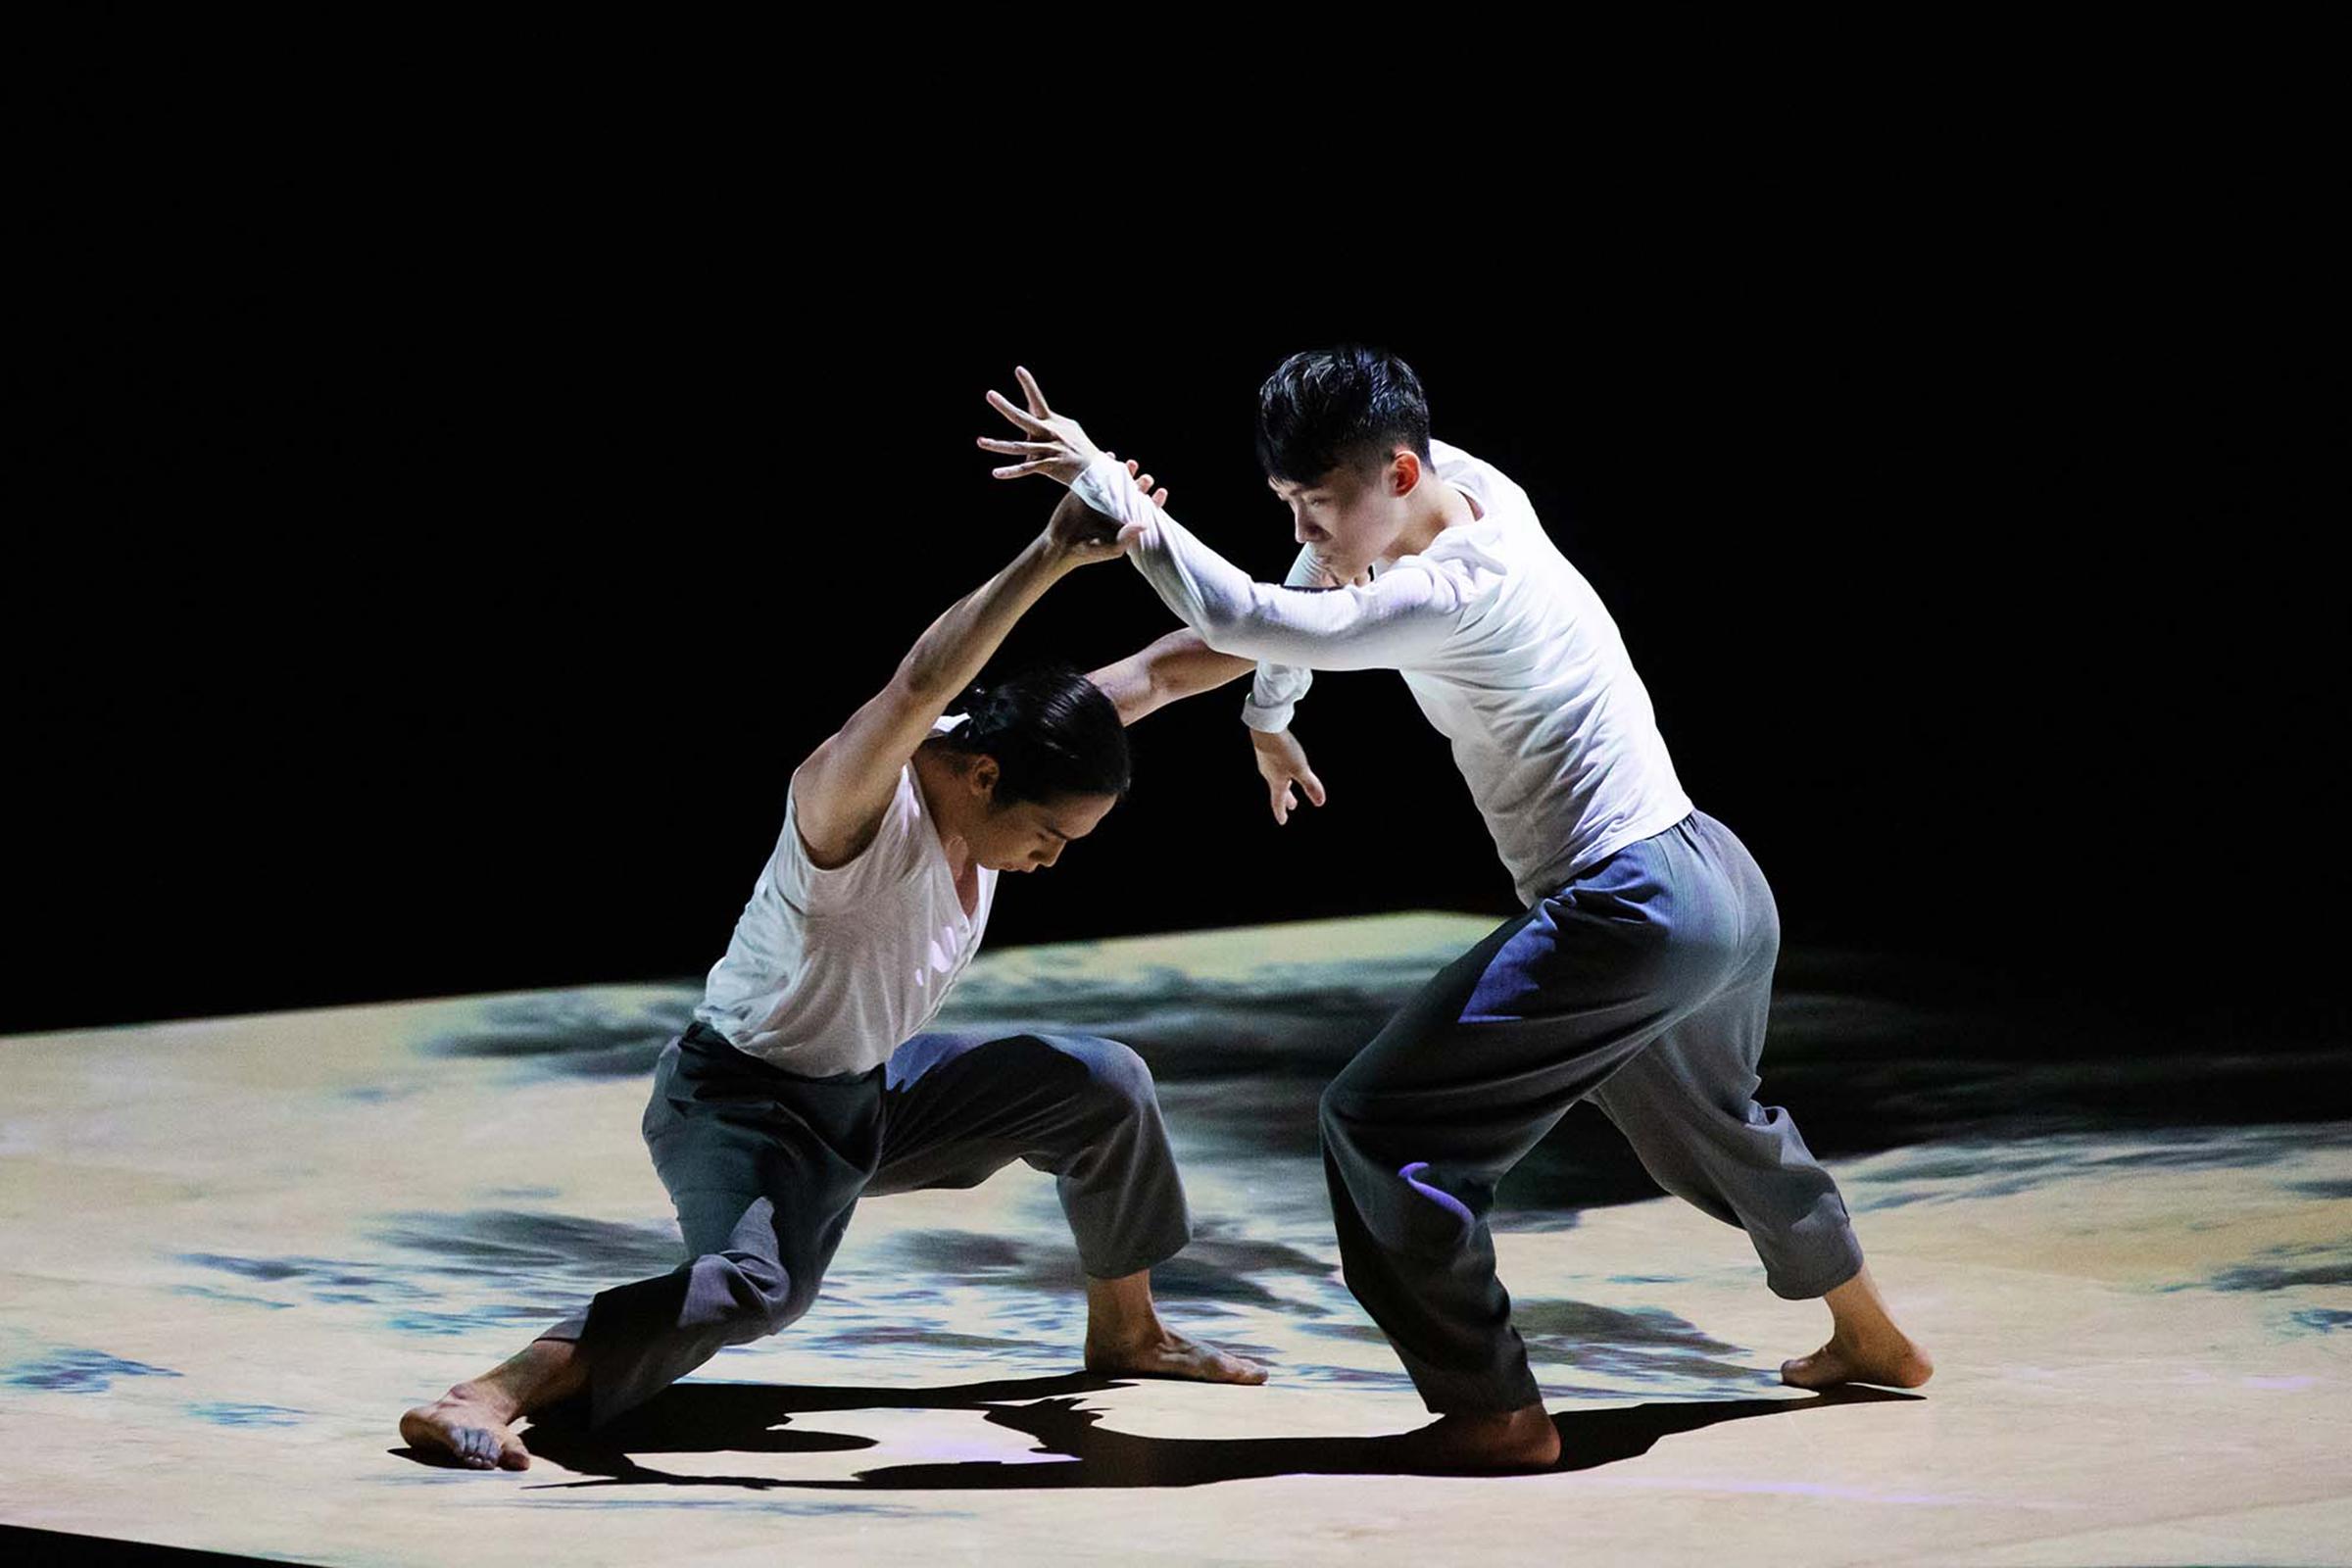 The Hong Kong Week 2023@Bangkok will be held in Bangkok, Thailand, from October 21 to November 12. The Hong Kong Dance Company will perform "Convergence", a work that blends Chinese dance with martial arts. (Source of photo: Henry Wong)